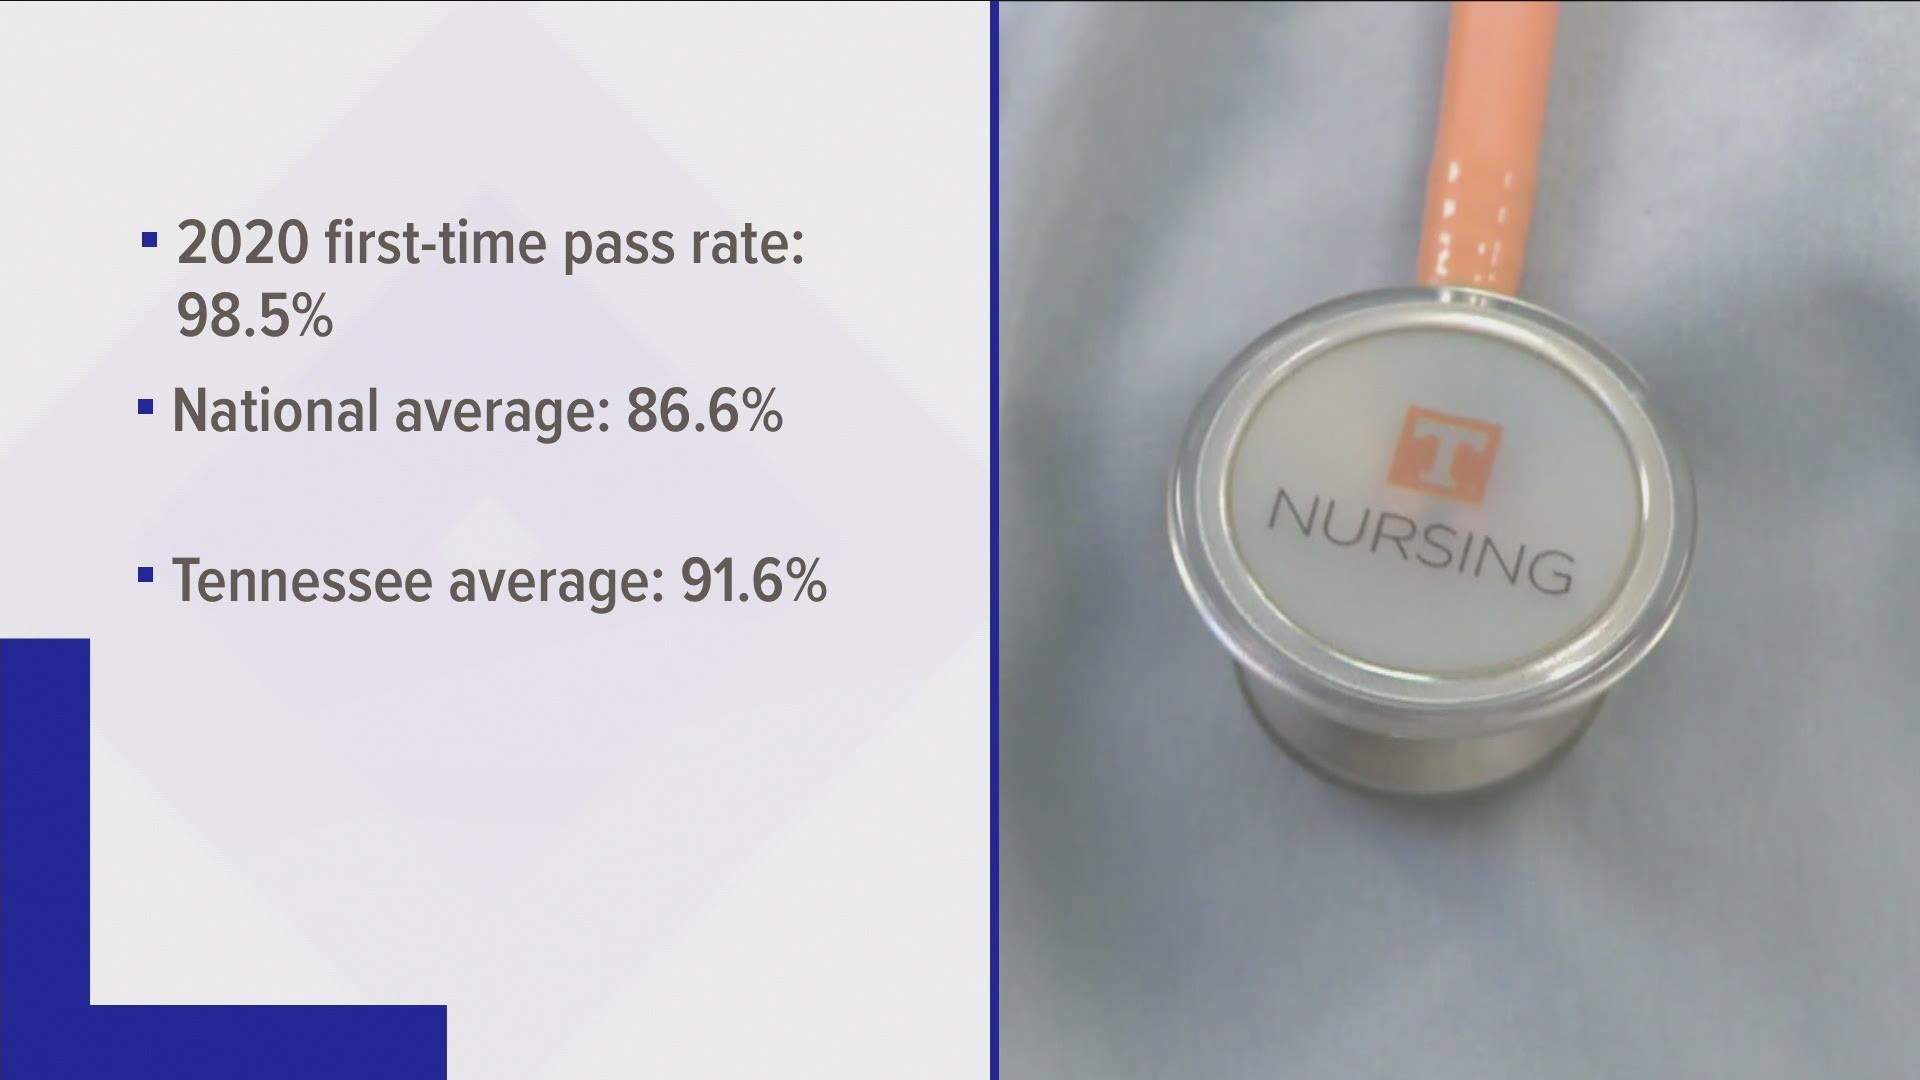 University of Tennessee graduates saw one of the highest first-time pass rates for the nurse licensure exam last year at 98.5%.